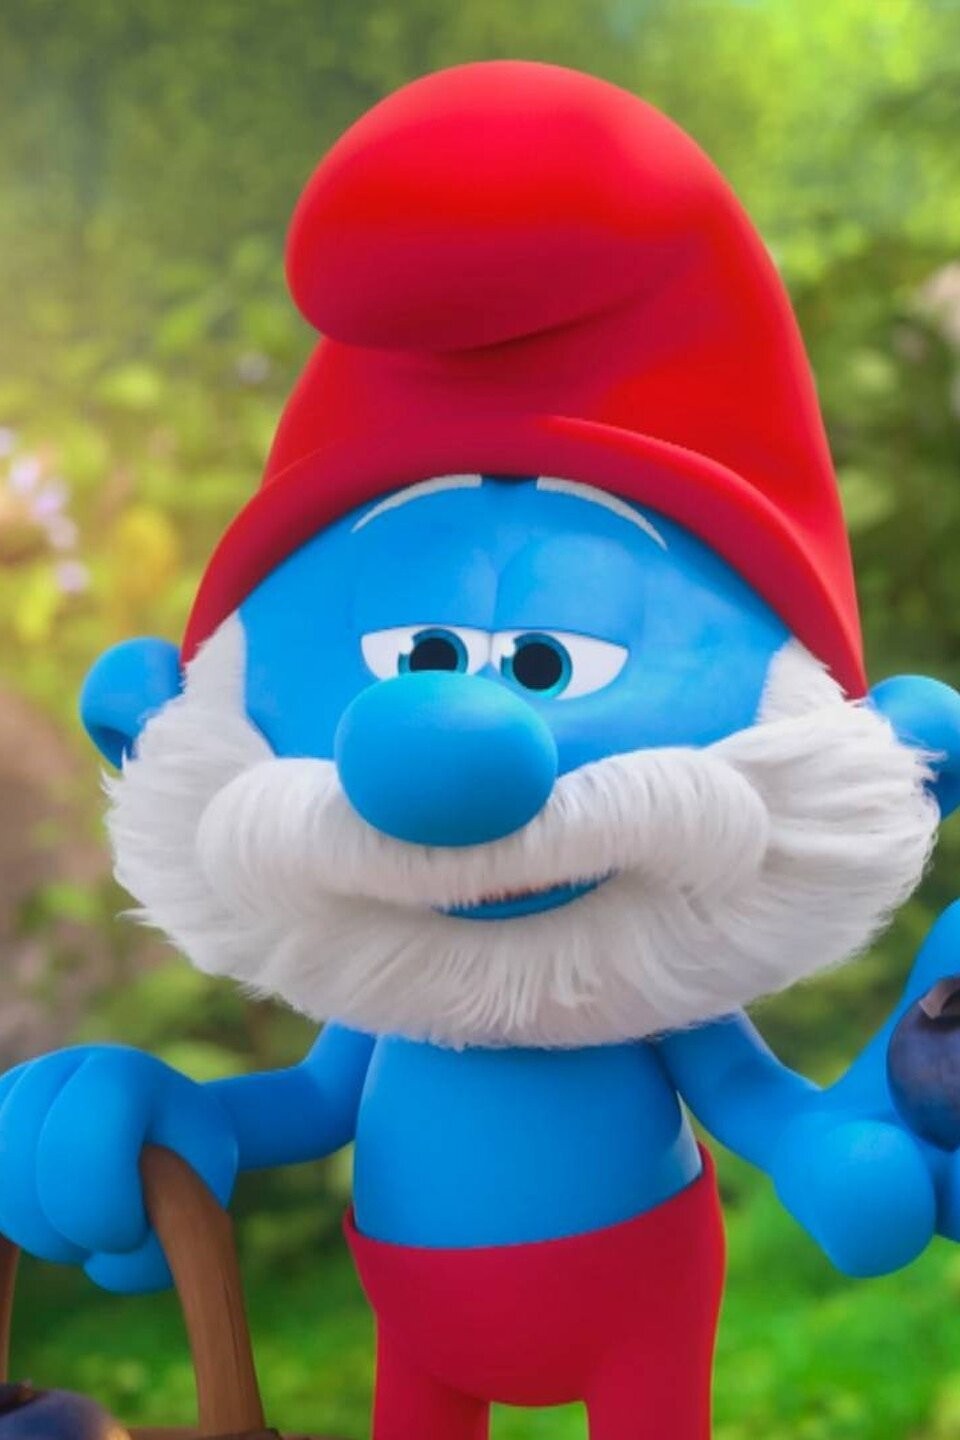 Watch The Smurfs Season 1 Episode 26: Smurfing Places/Poet Slam - Full show  on Paramount Plus